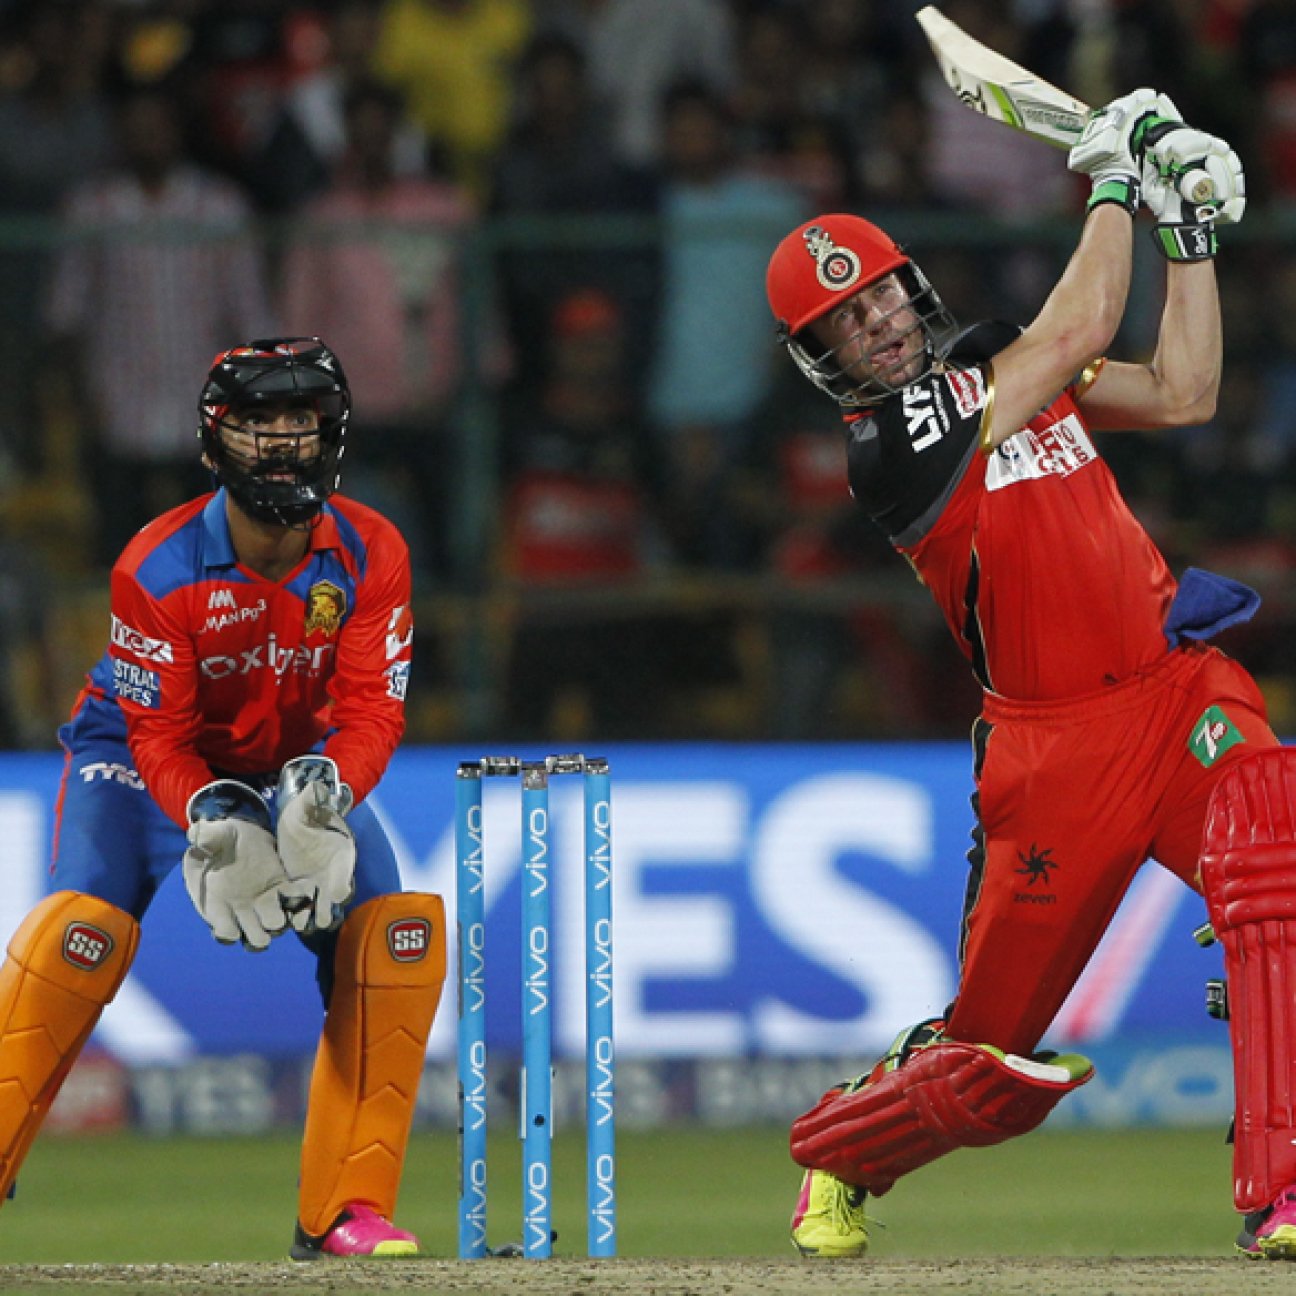 AB de Villiers of Royal Challengers Bangalore bats during match 57 (Qualifier 1) of the Vivo IPL ( Indian Premier League ) 2016 between the Gujarat Lions and the Royal Challengers Bangalore held at The M. Chinnaswamy Stadium in Bangalore, India, on the 24th May 2016 Photo by Deepak Malik / IPL/ SPORTZPICS